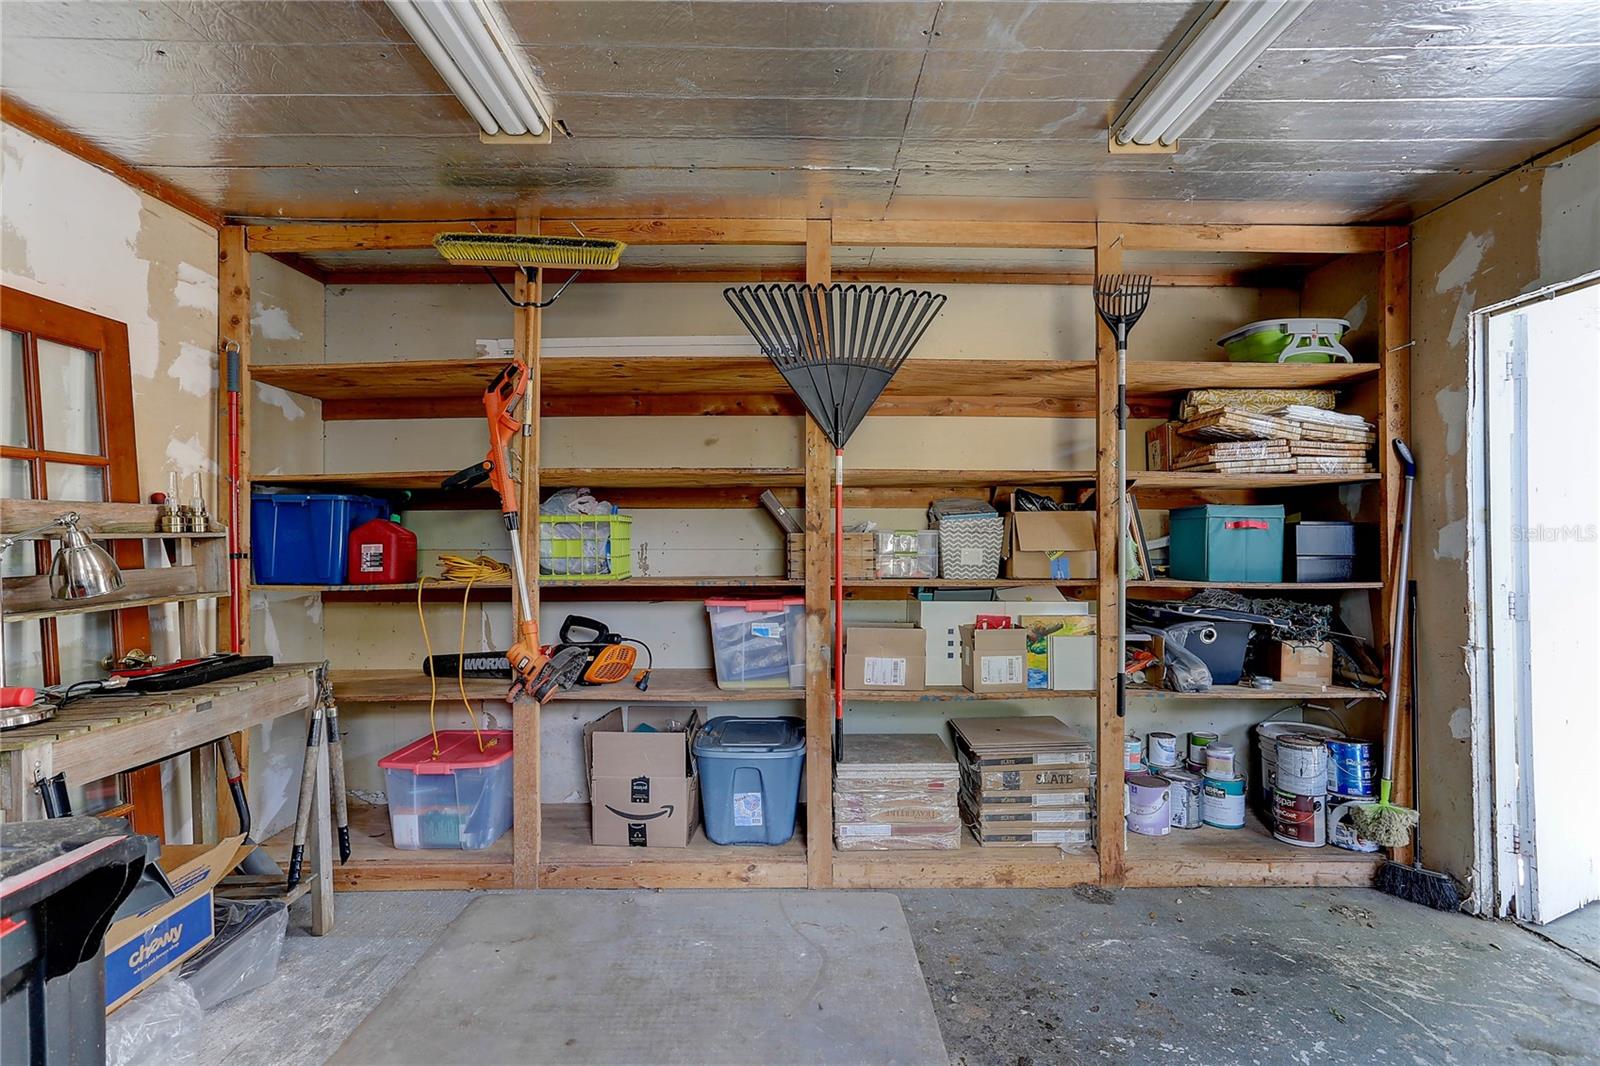 Shelving in the workshop